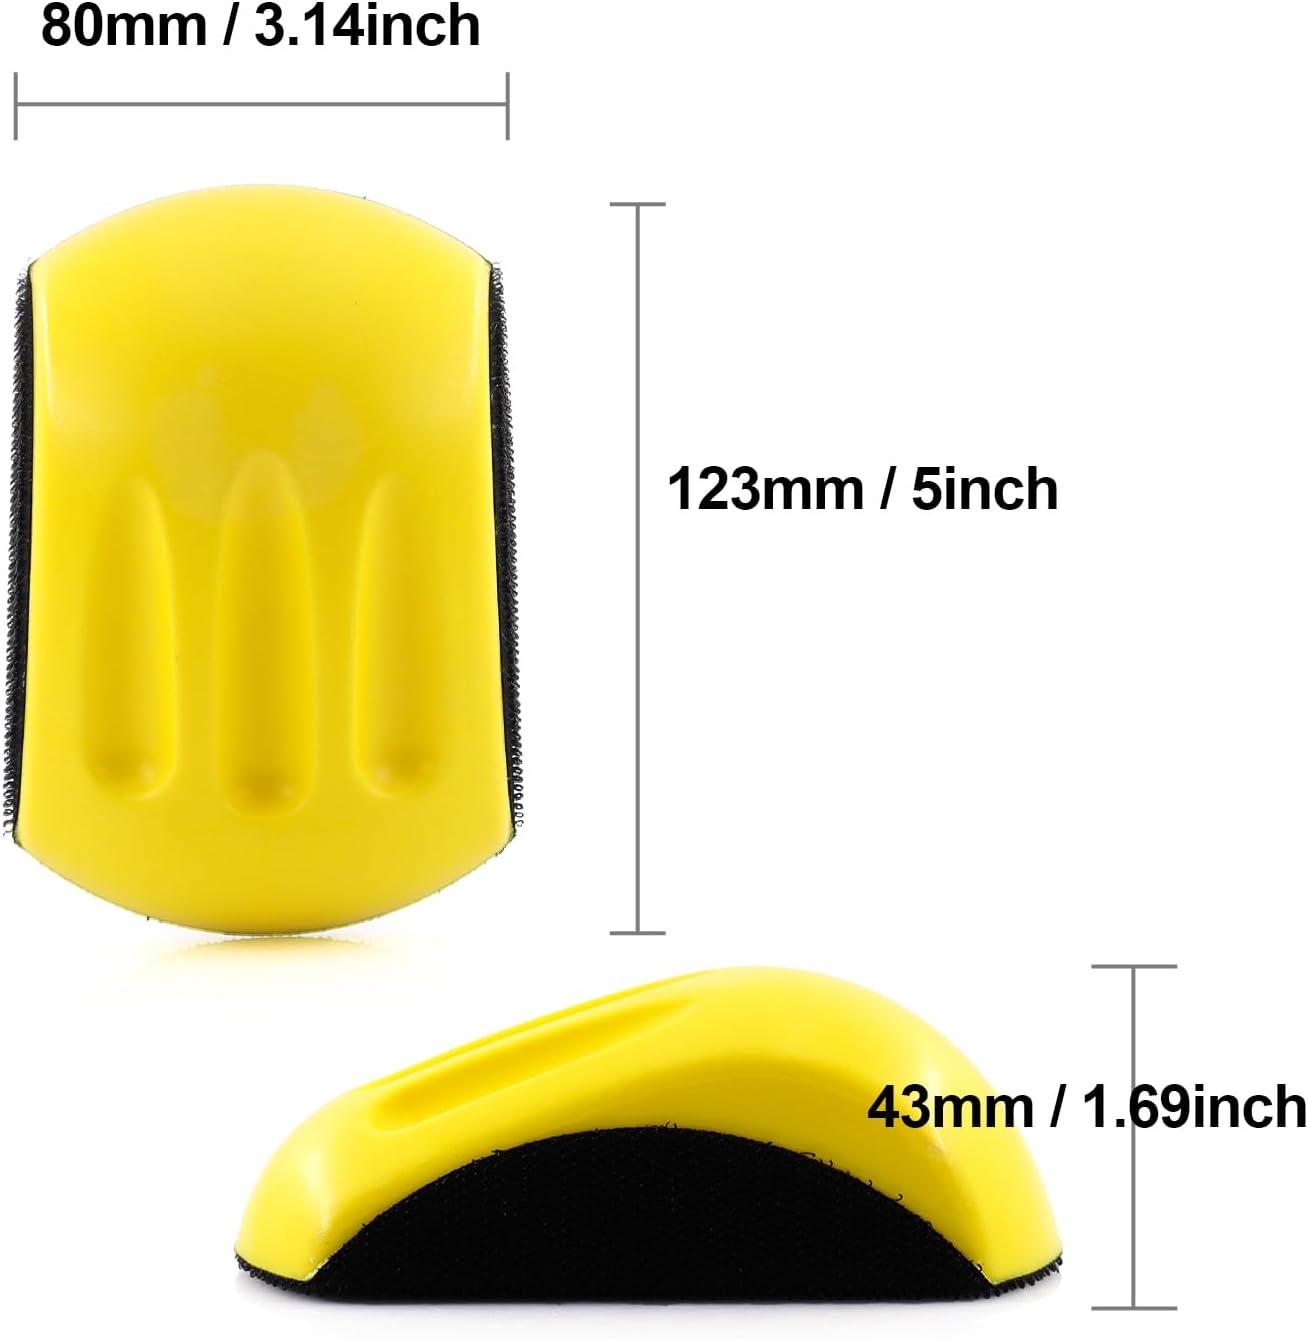 5-Inch Hand Sanding Mouse, Hook and Loop Attachment, Yellow - Legit Grit